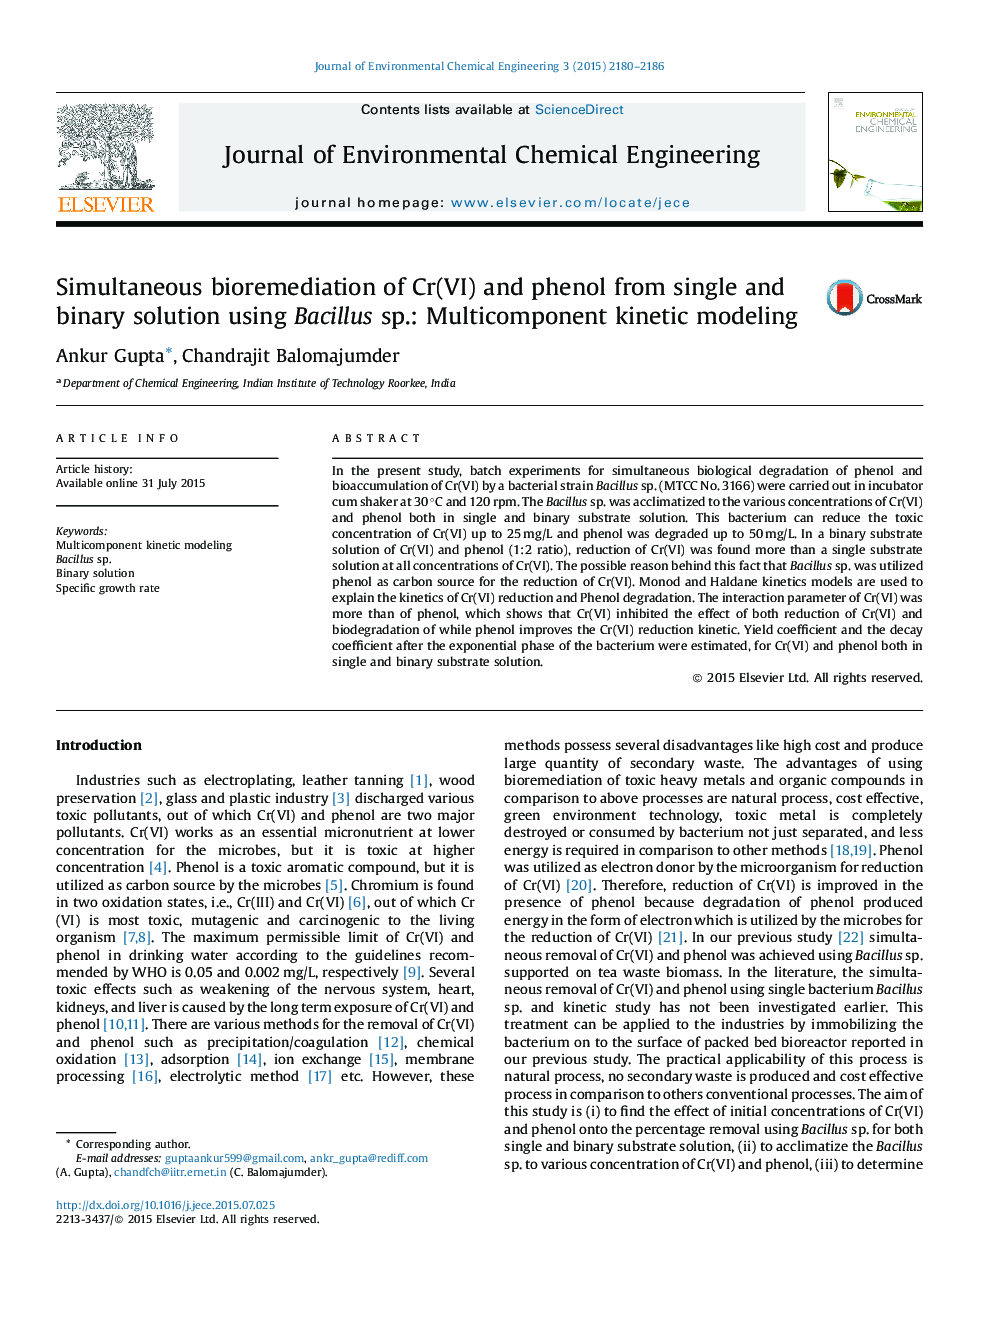 Simultaneous bioremediation of Cr(VI) and phenol from single and binary solution using Bacillus sp.: Multicomponent kinetic modeling